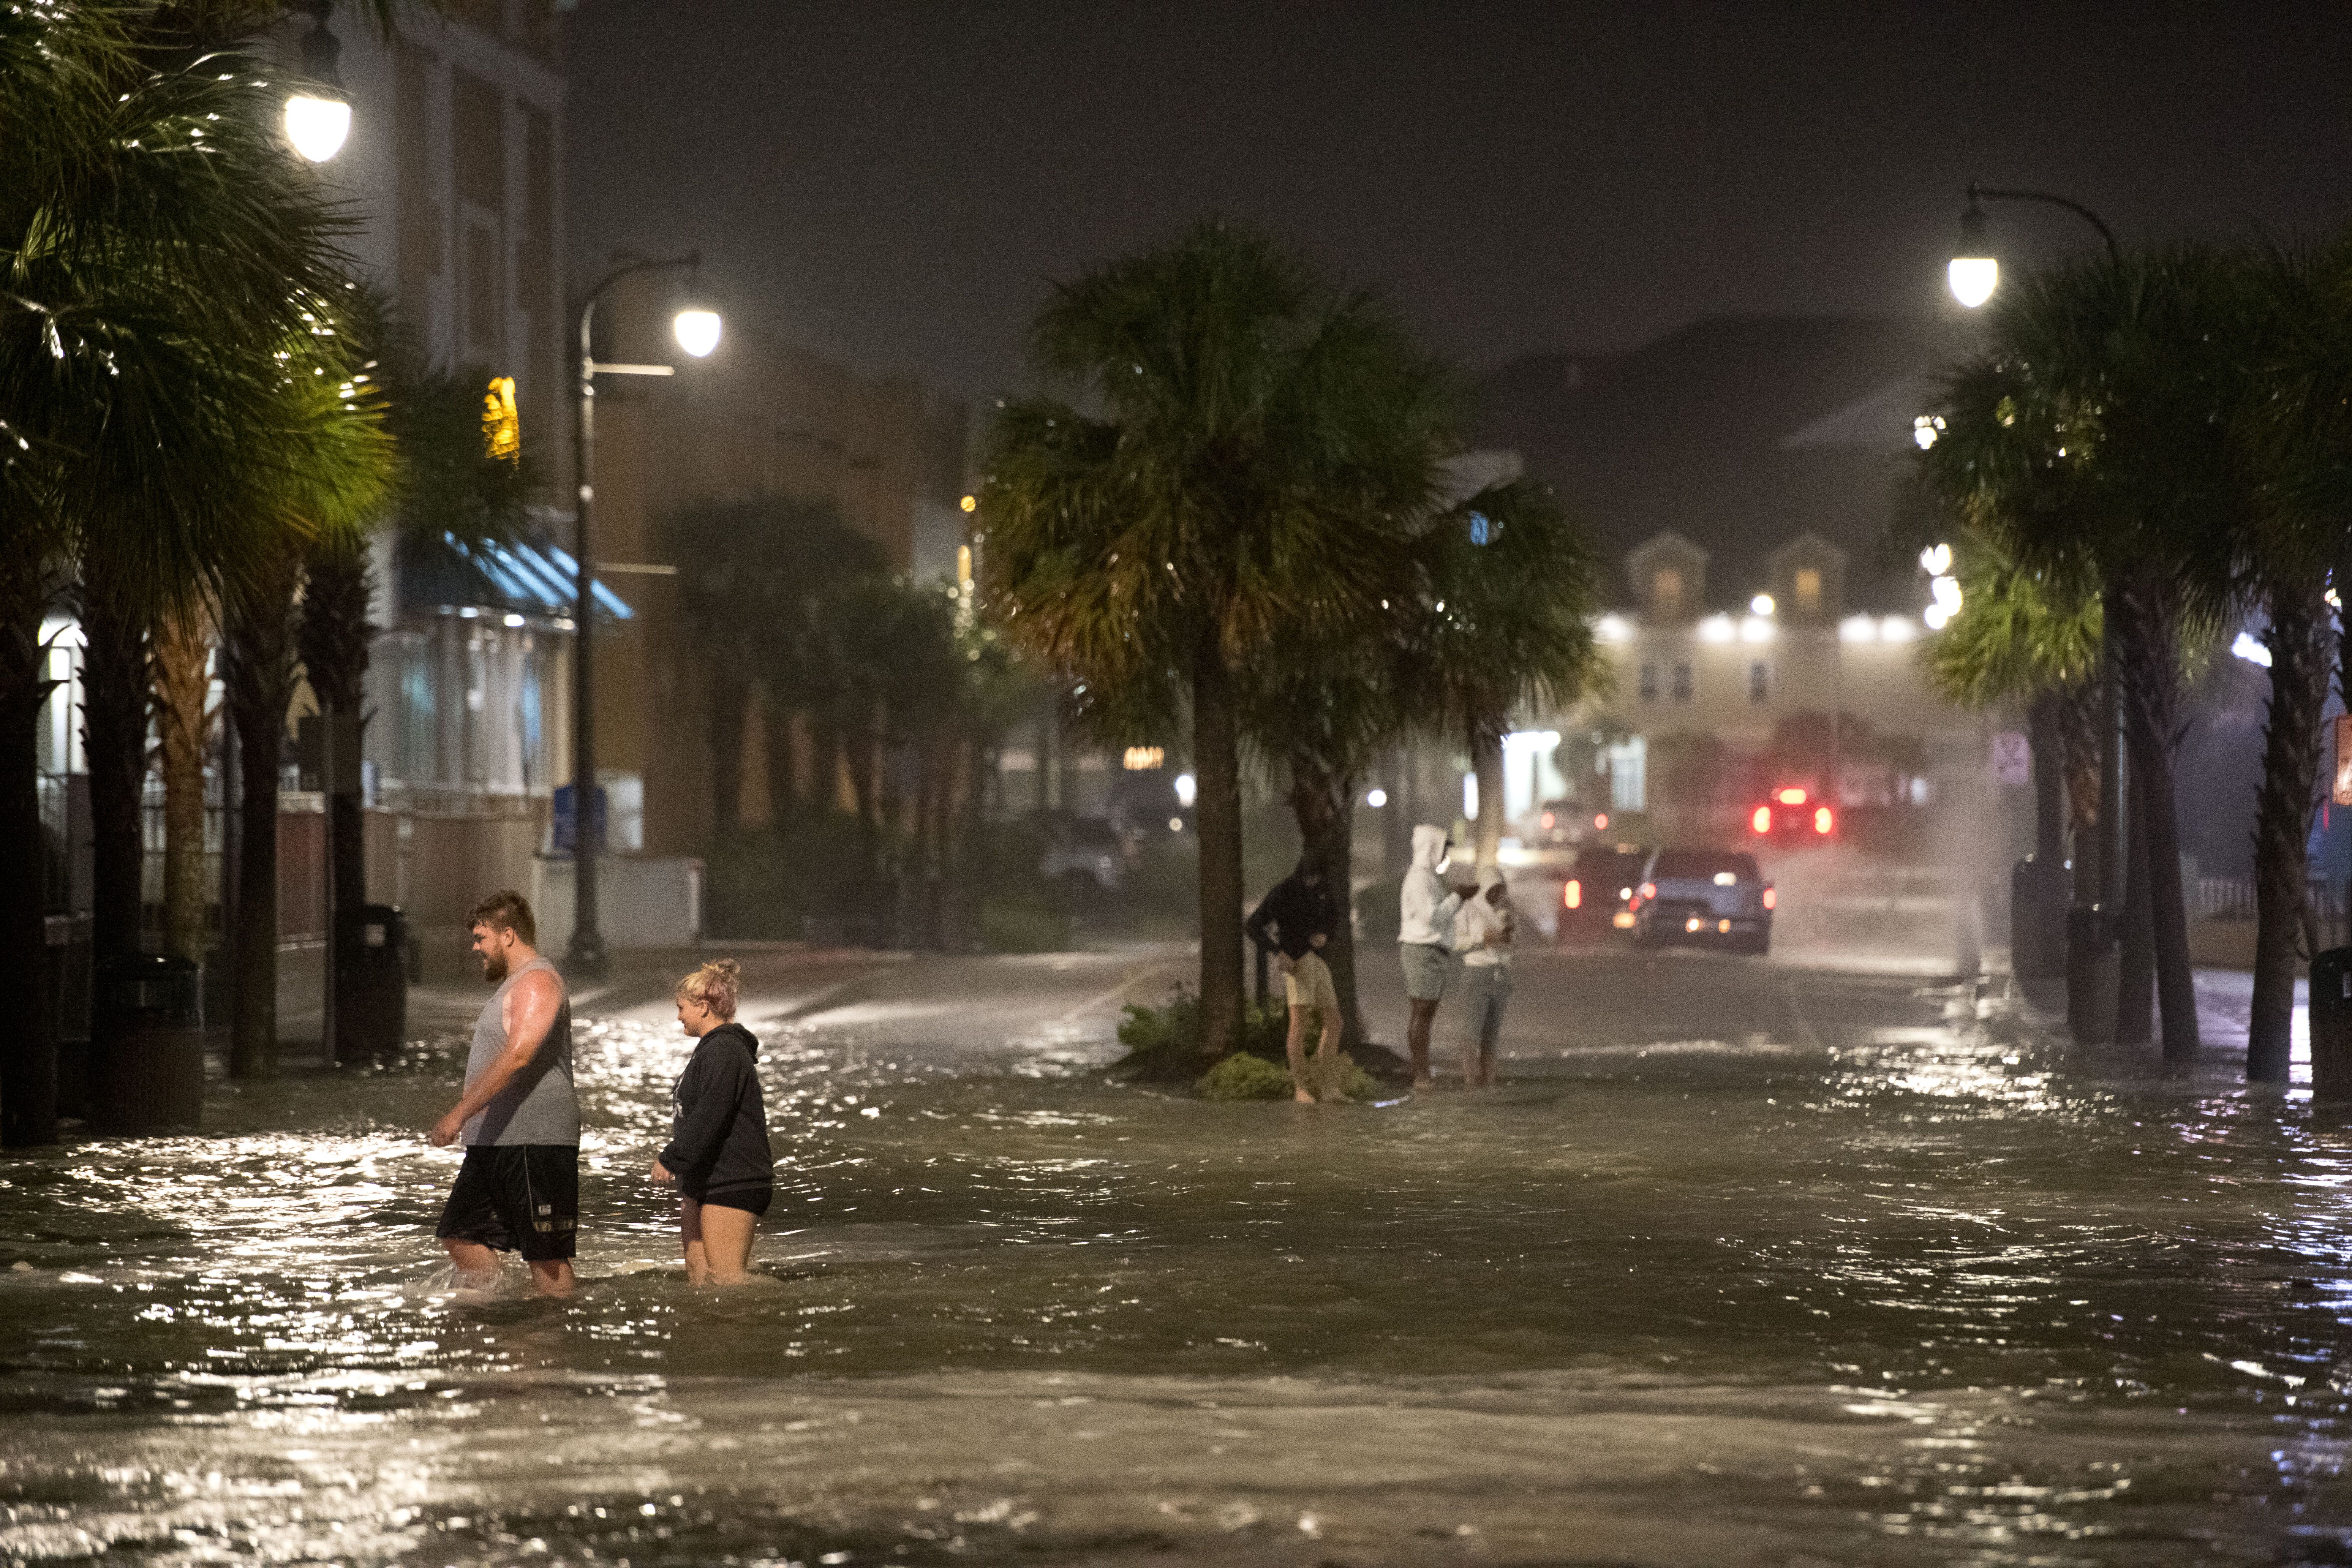  People walk through floodwaters on Ocean Blvd. August 3, 2020 in Myrtle Beach, South Carolina.